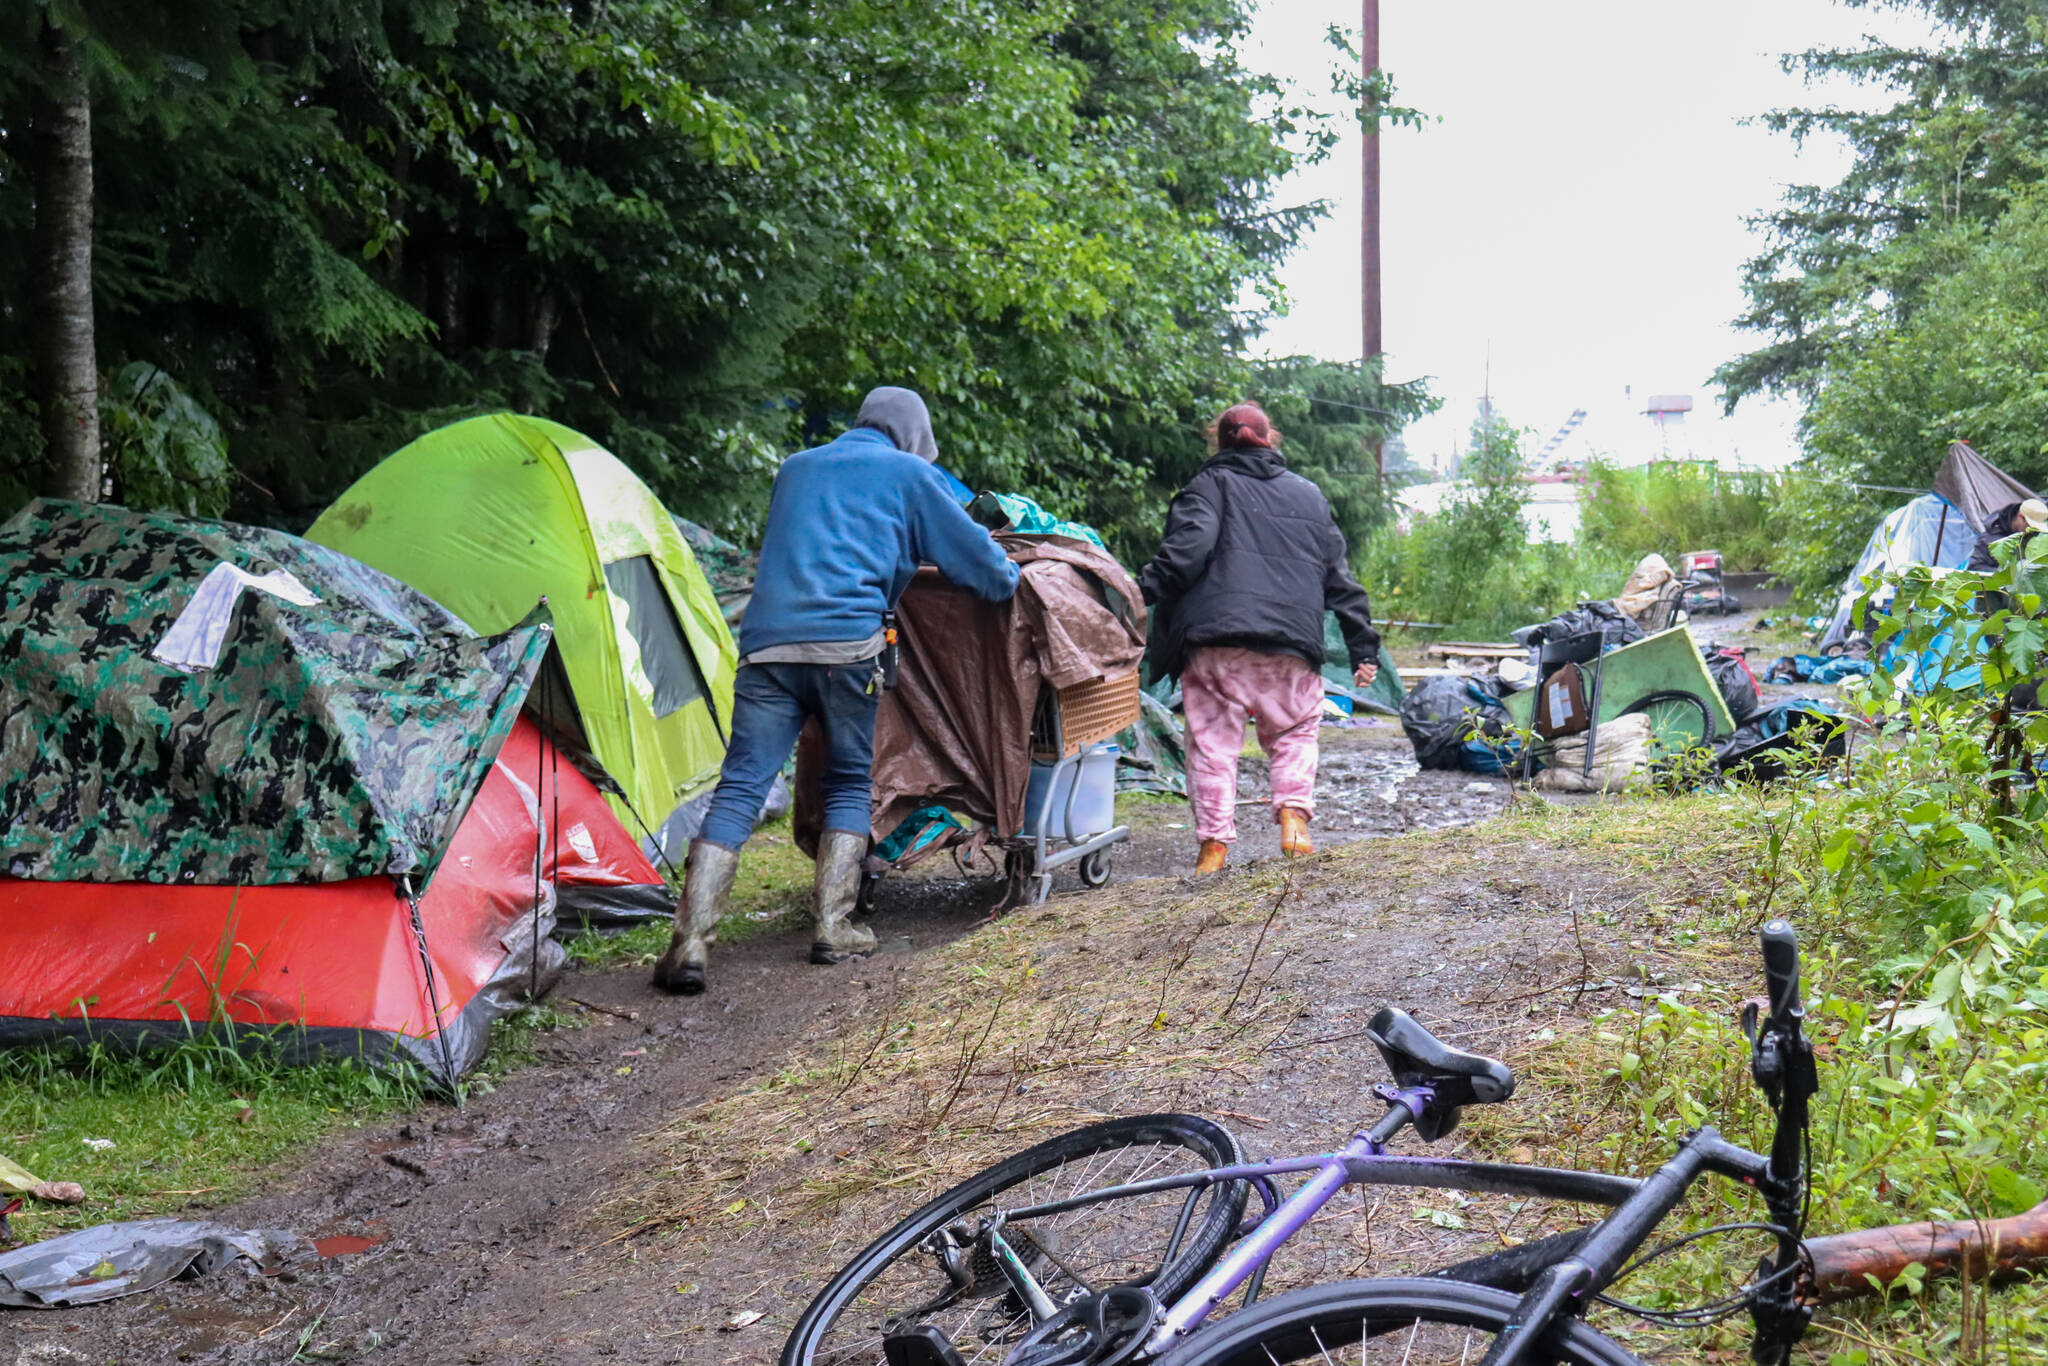 Christopher Moore helps another Juneau homeless resident wheel her belongings from a makeshift campsite on private property near the airport on Monday. (Jasz Garrett / Juneau Empire)